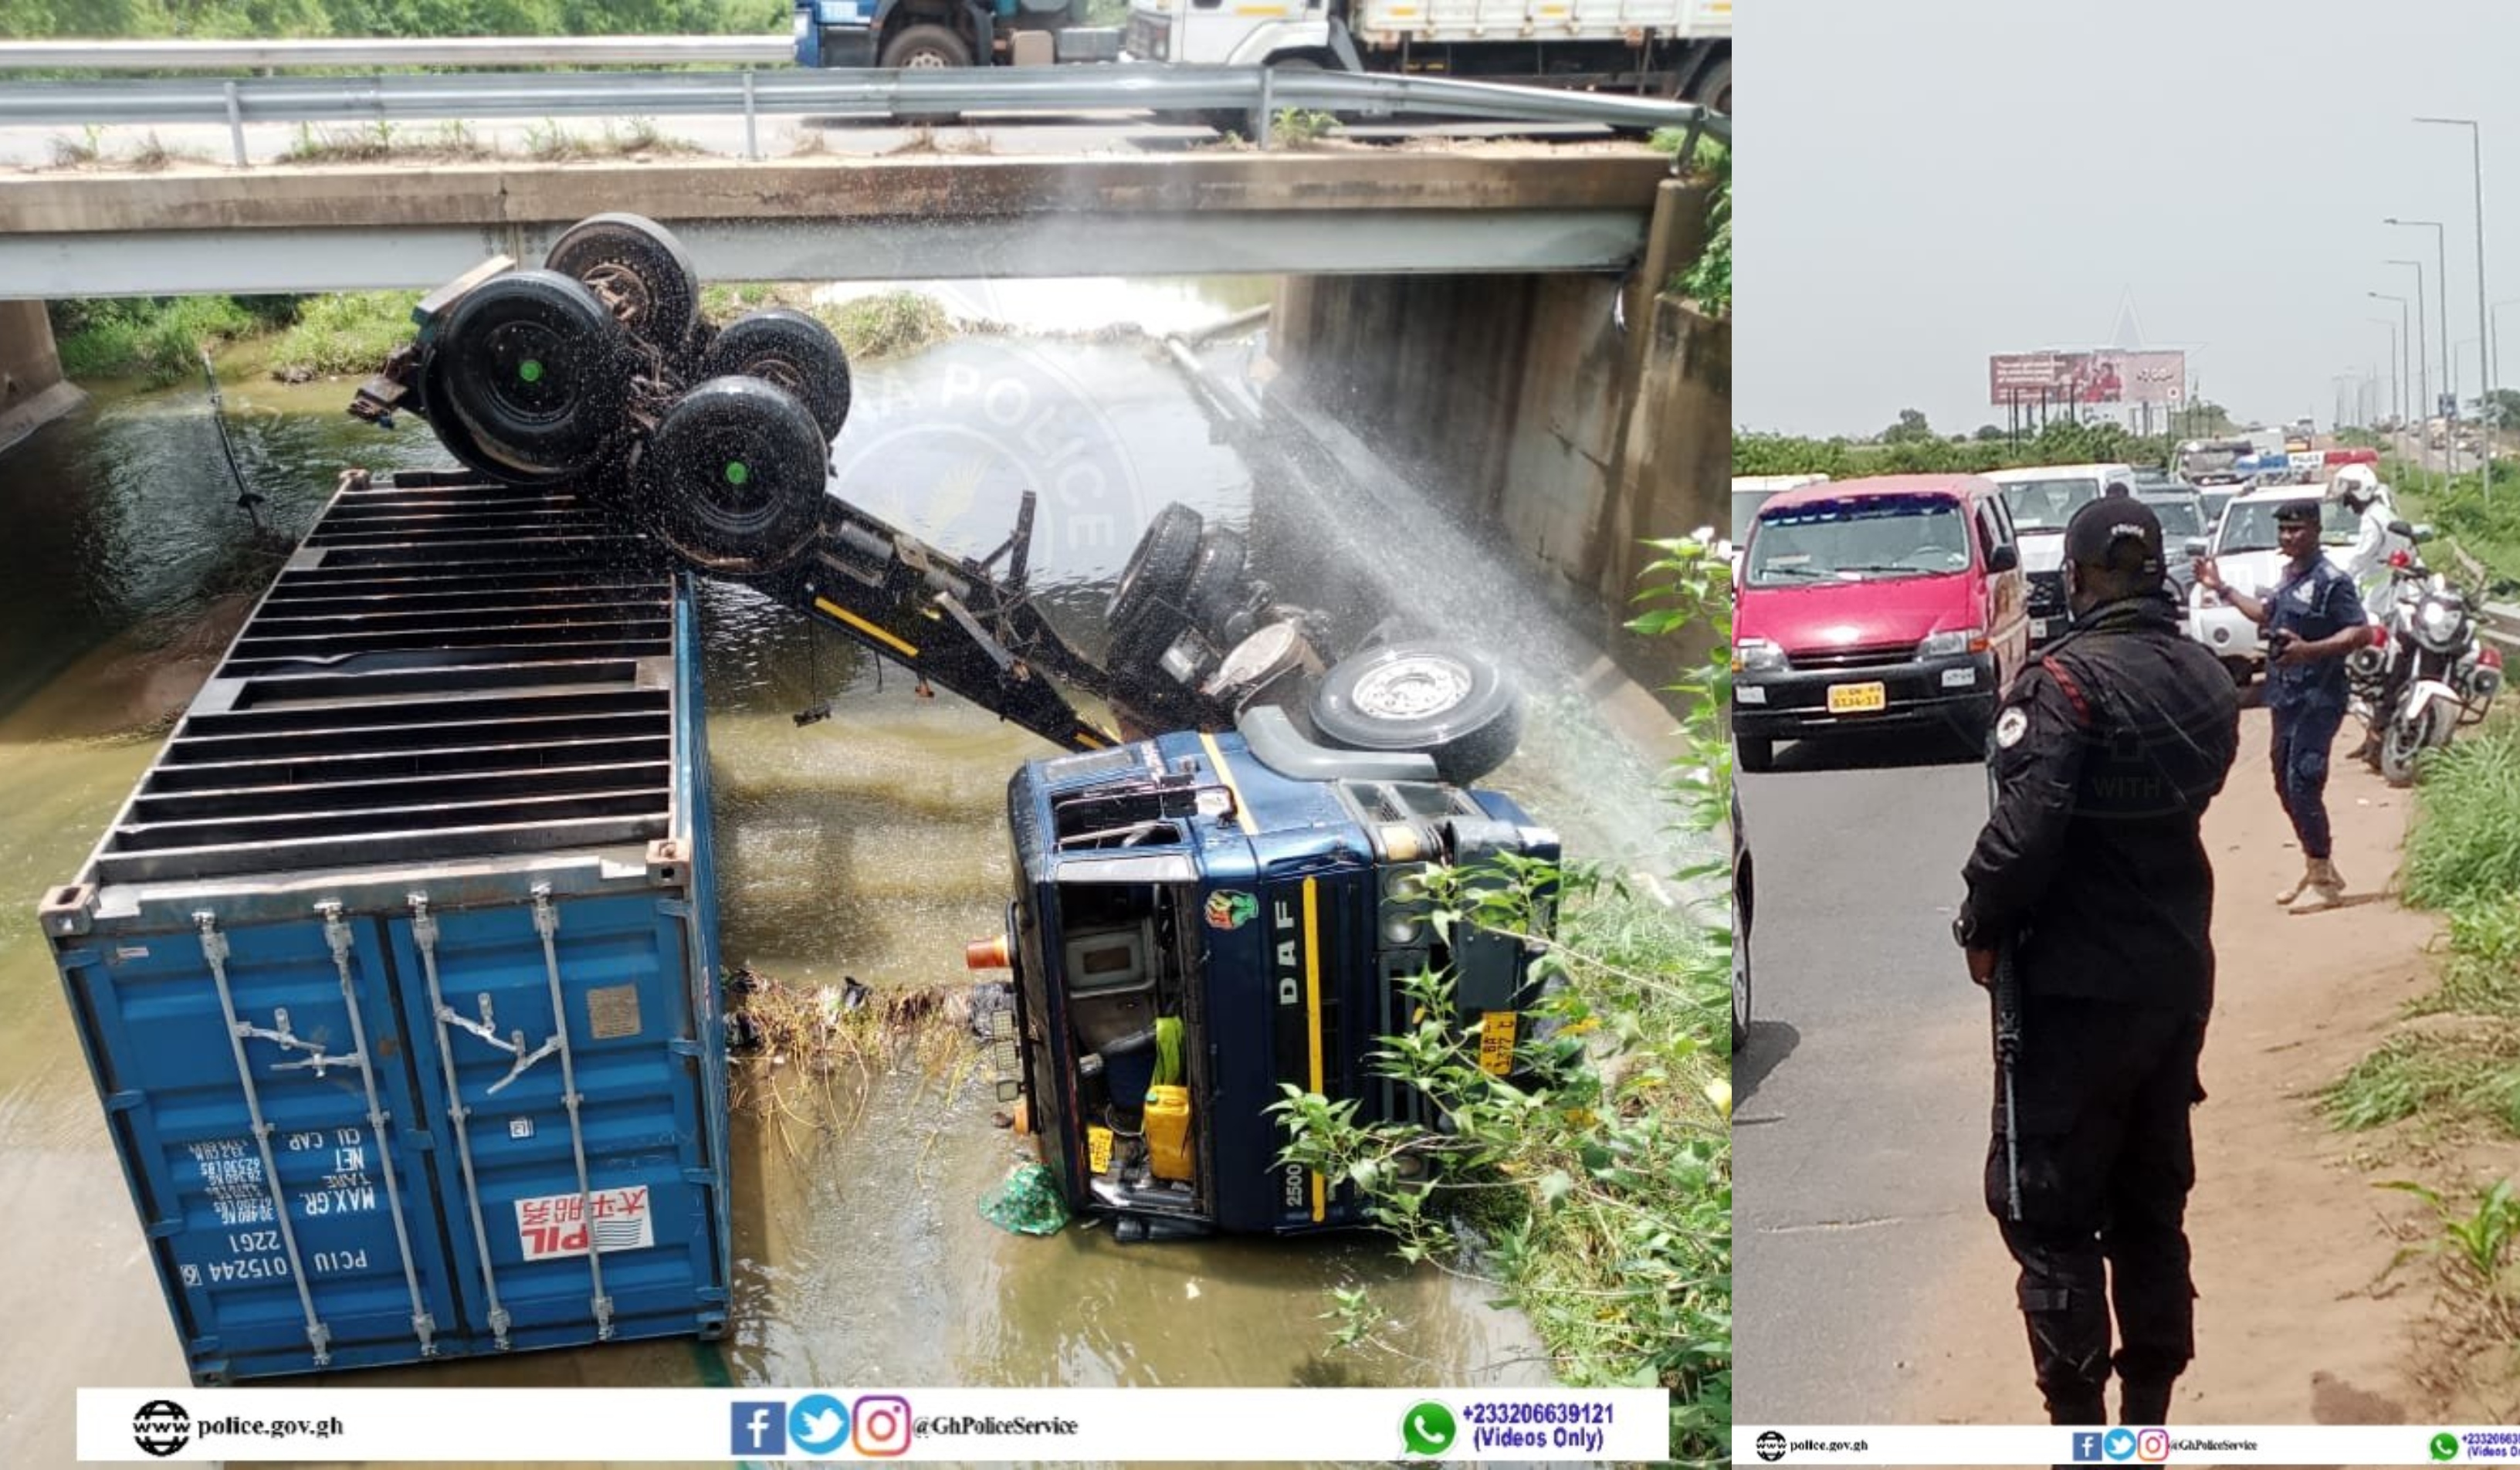 2 separate accidents block traffic flow on Accra-bound side of motorway